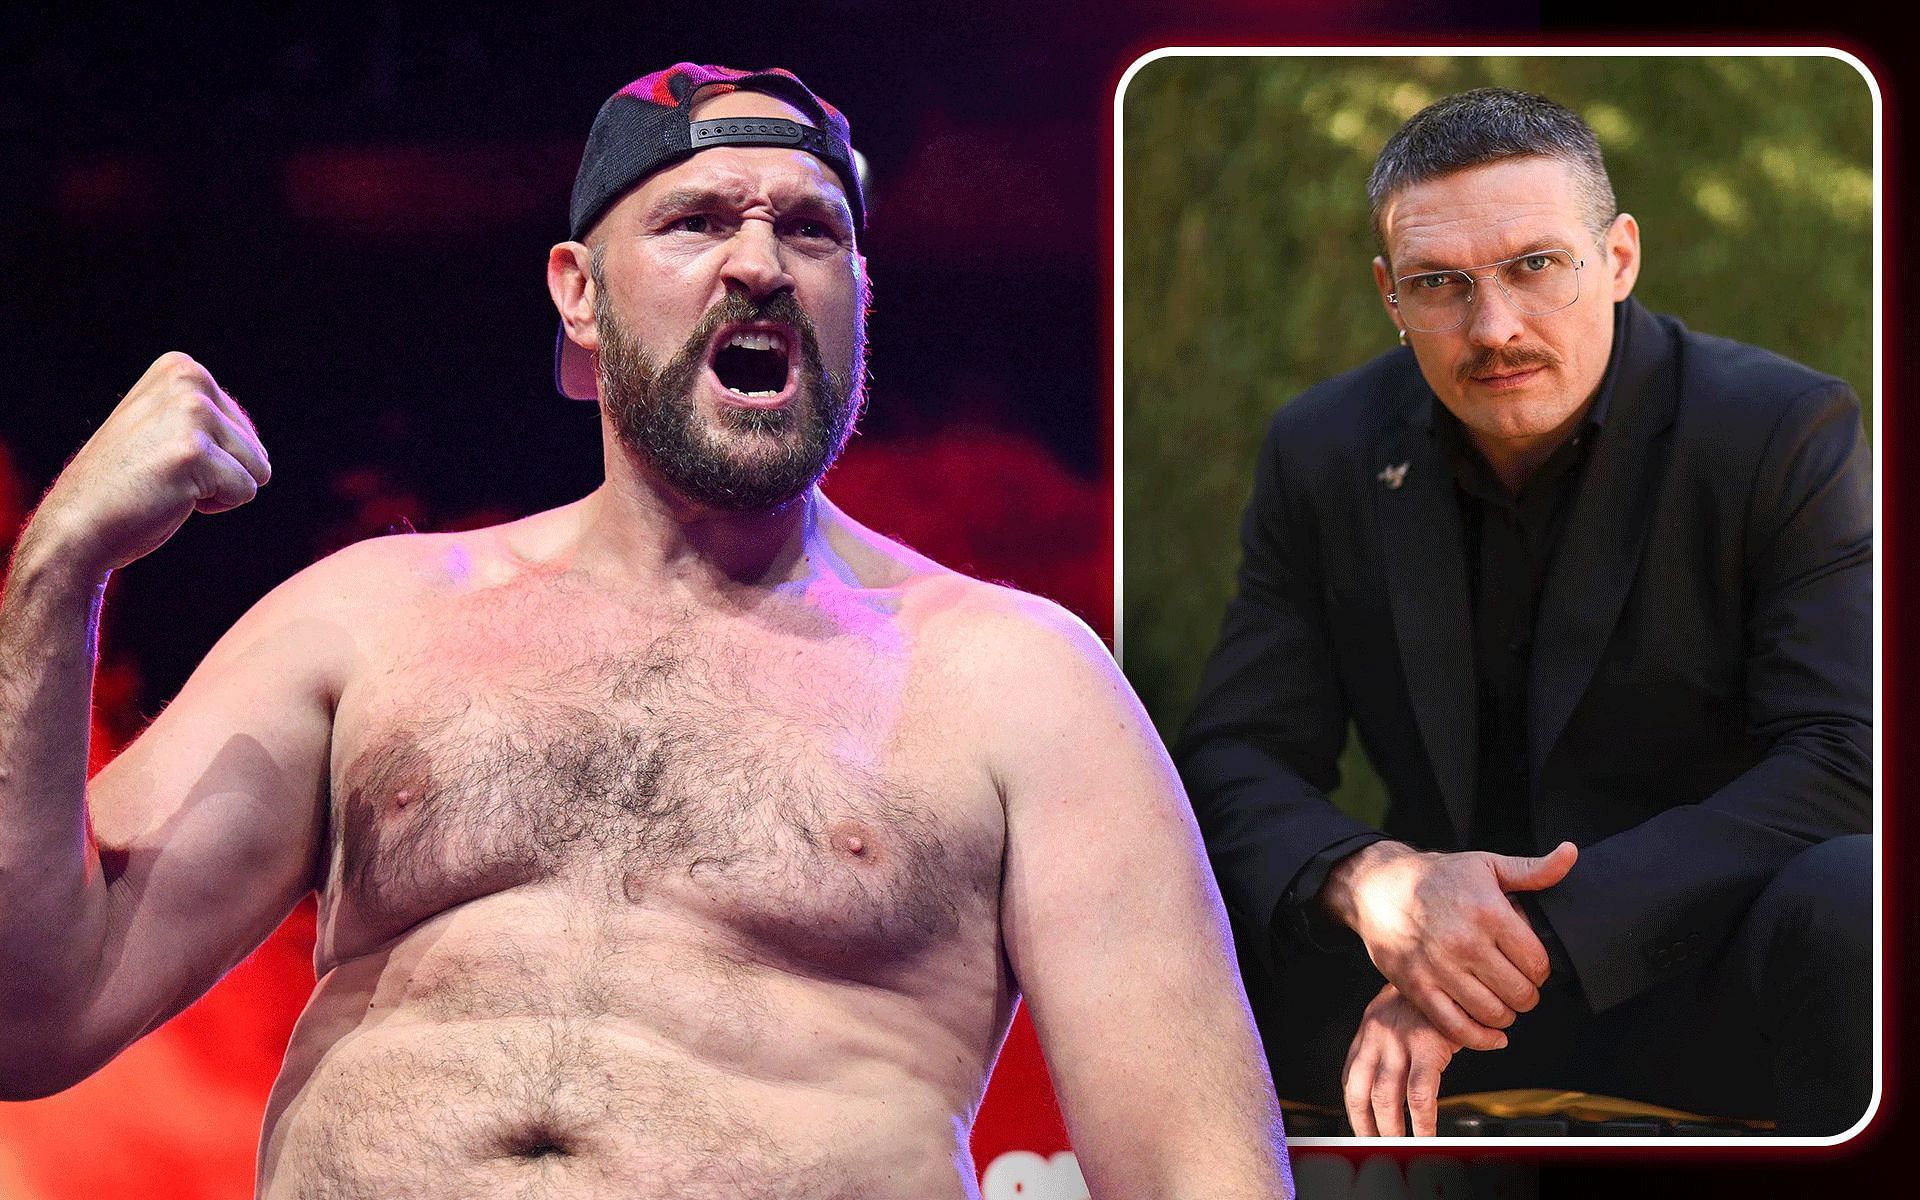 Tyson Fury (left) vs. Oleksandr Usyk (right) rematch set for May 18 [Image courtesy Getty image and @@usykaa on Instagram]